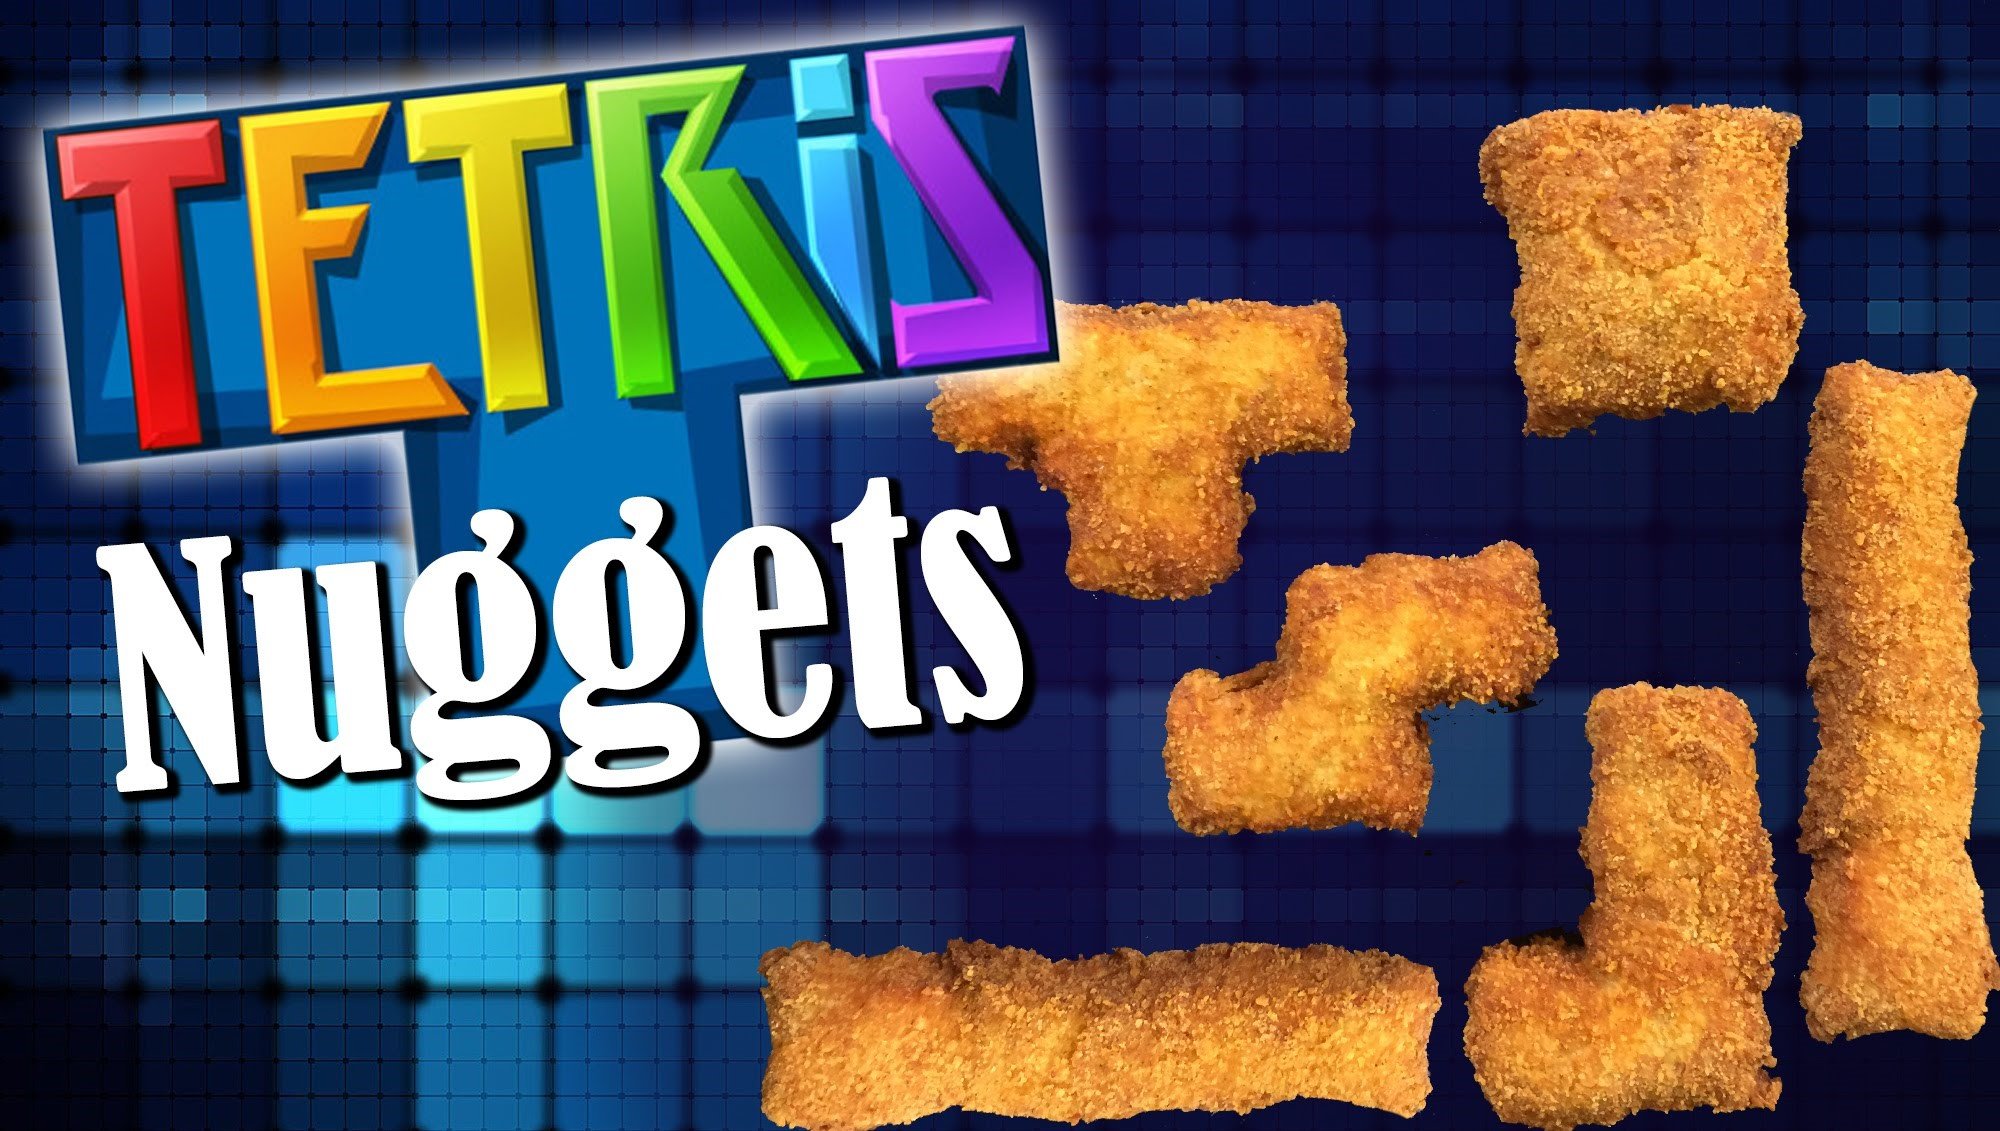 Check Out This Tasty DIY Tetris Chicken Nugget Recipe